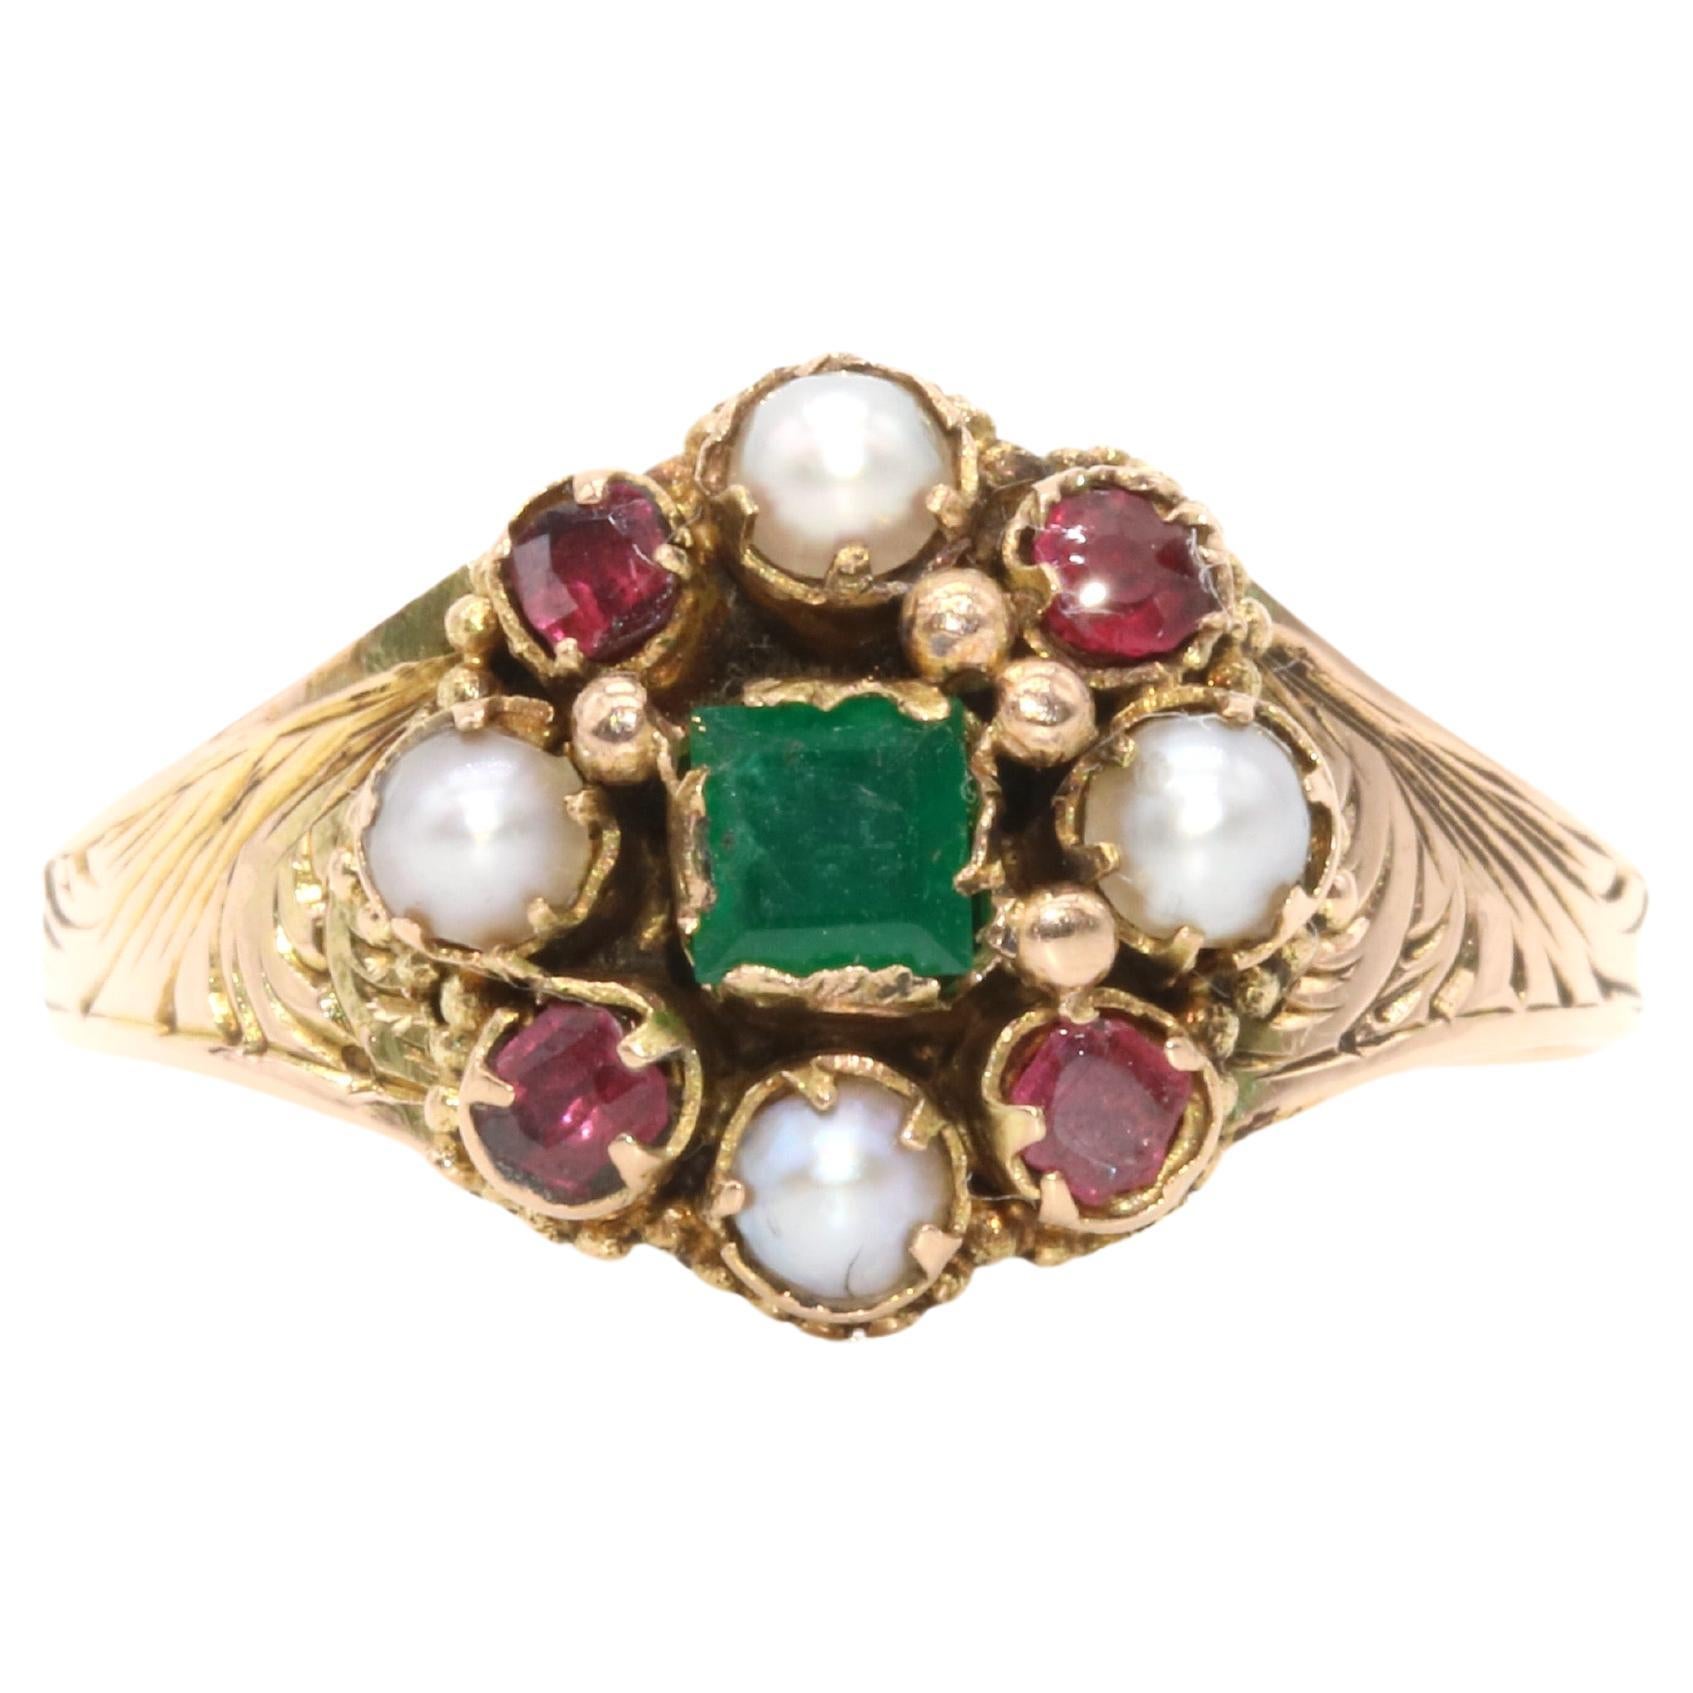 Antique Victorian 15K Yellow Gold Emerald, Garnet and Pearl Cluster Ring